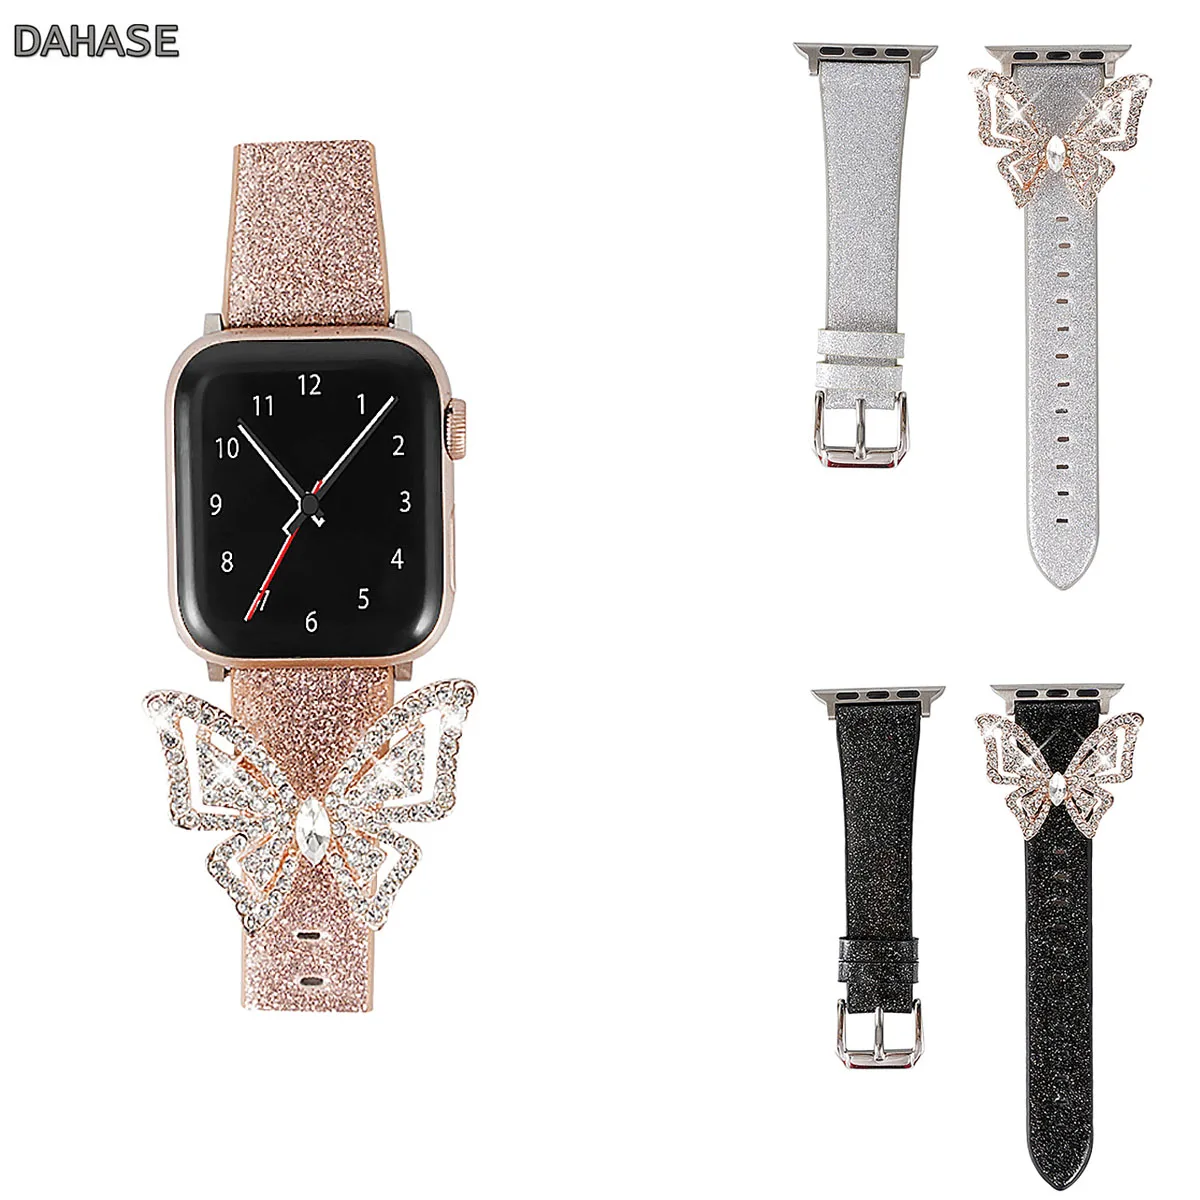 Glitter Butterfly Leather Strap For Apple Watch Band Series 1 2 3 4 5 6 SE Diamond Bracelet For 38 40 42 44mm iWatch Wristband